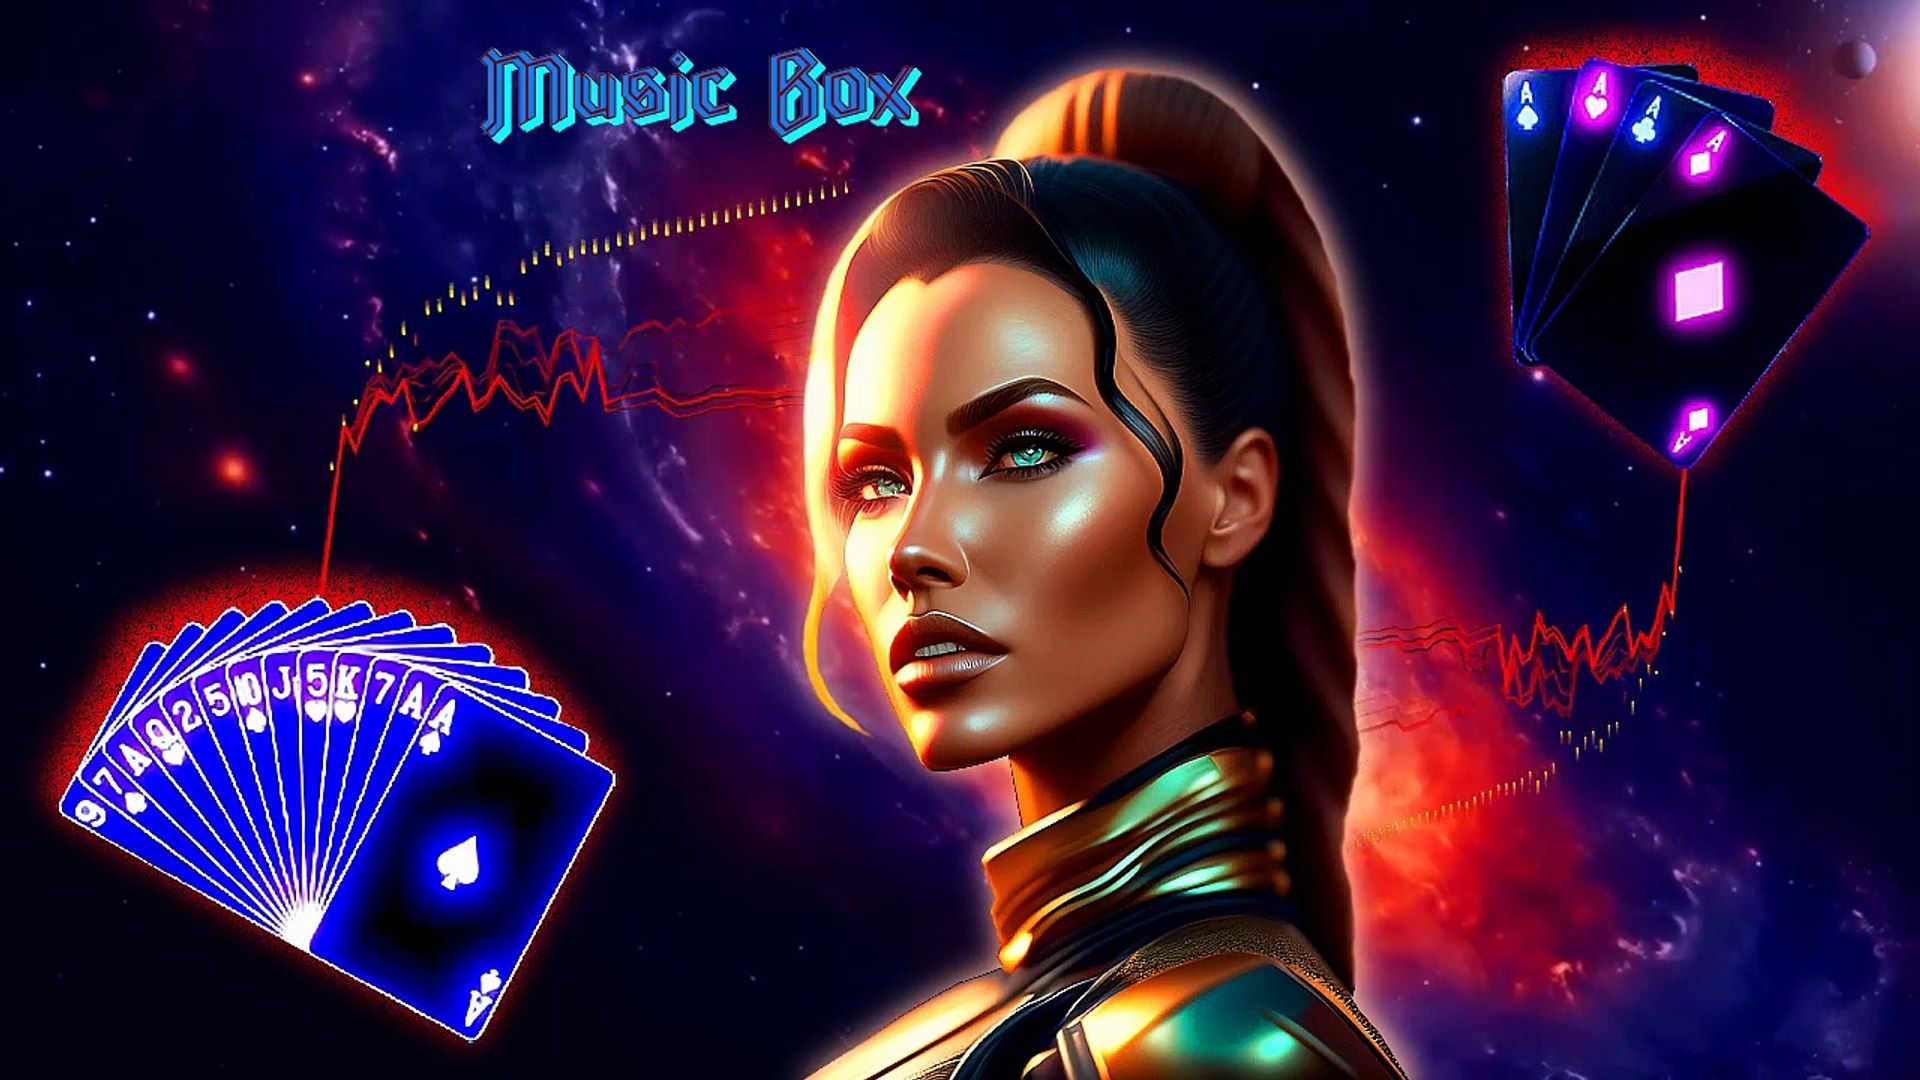 ⁣MUSIC BOX. DEPRESSION-12. Cool music collection for you. Beautiful music, calm music, relax music, m